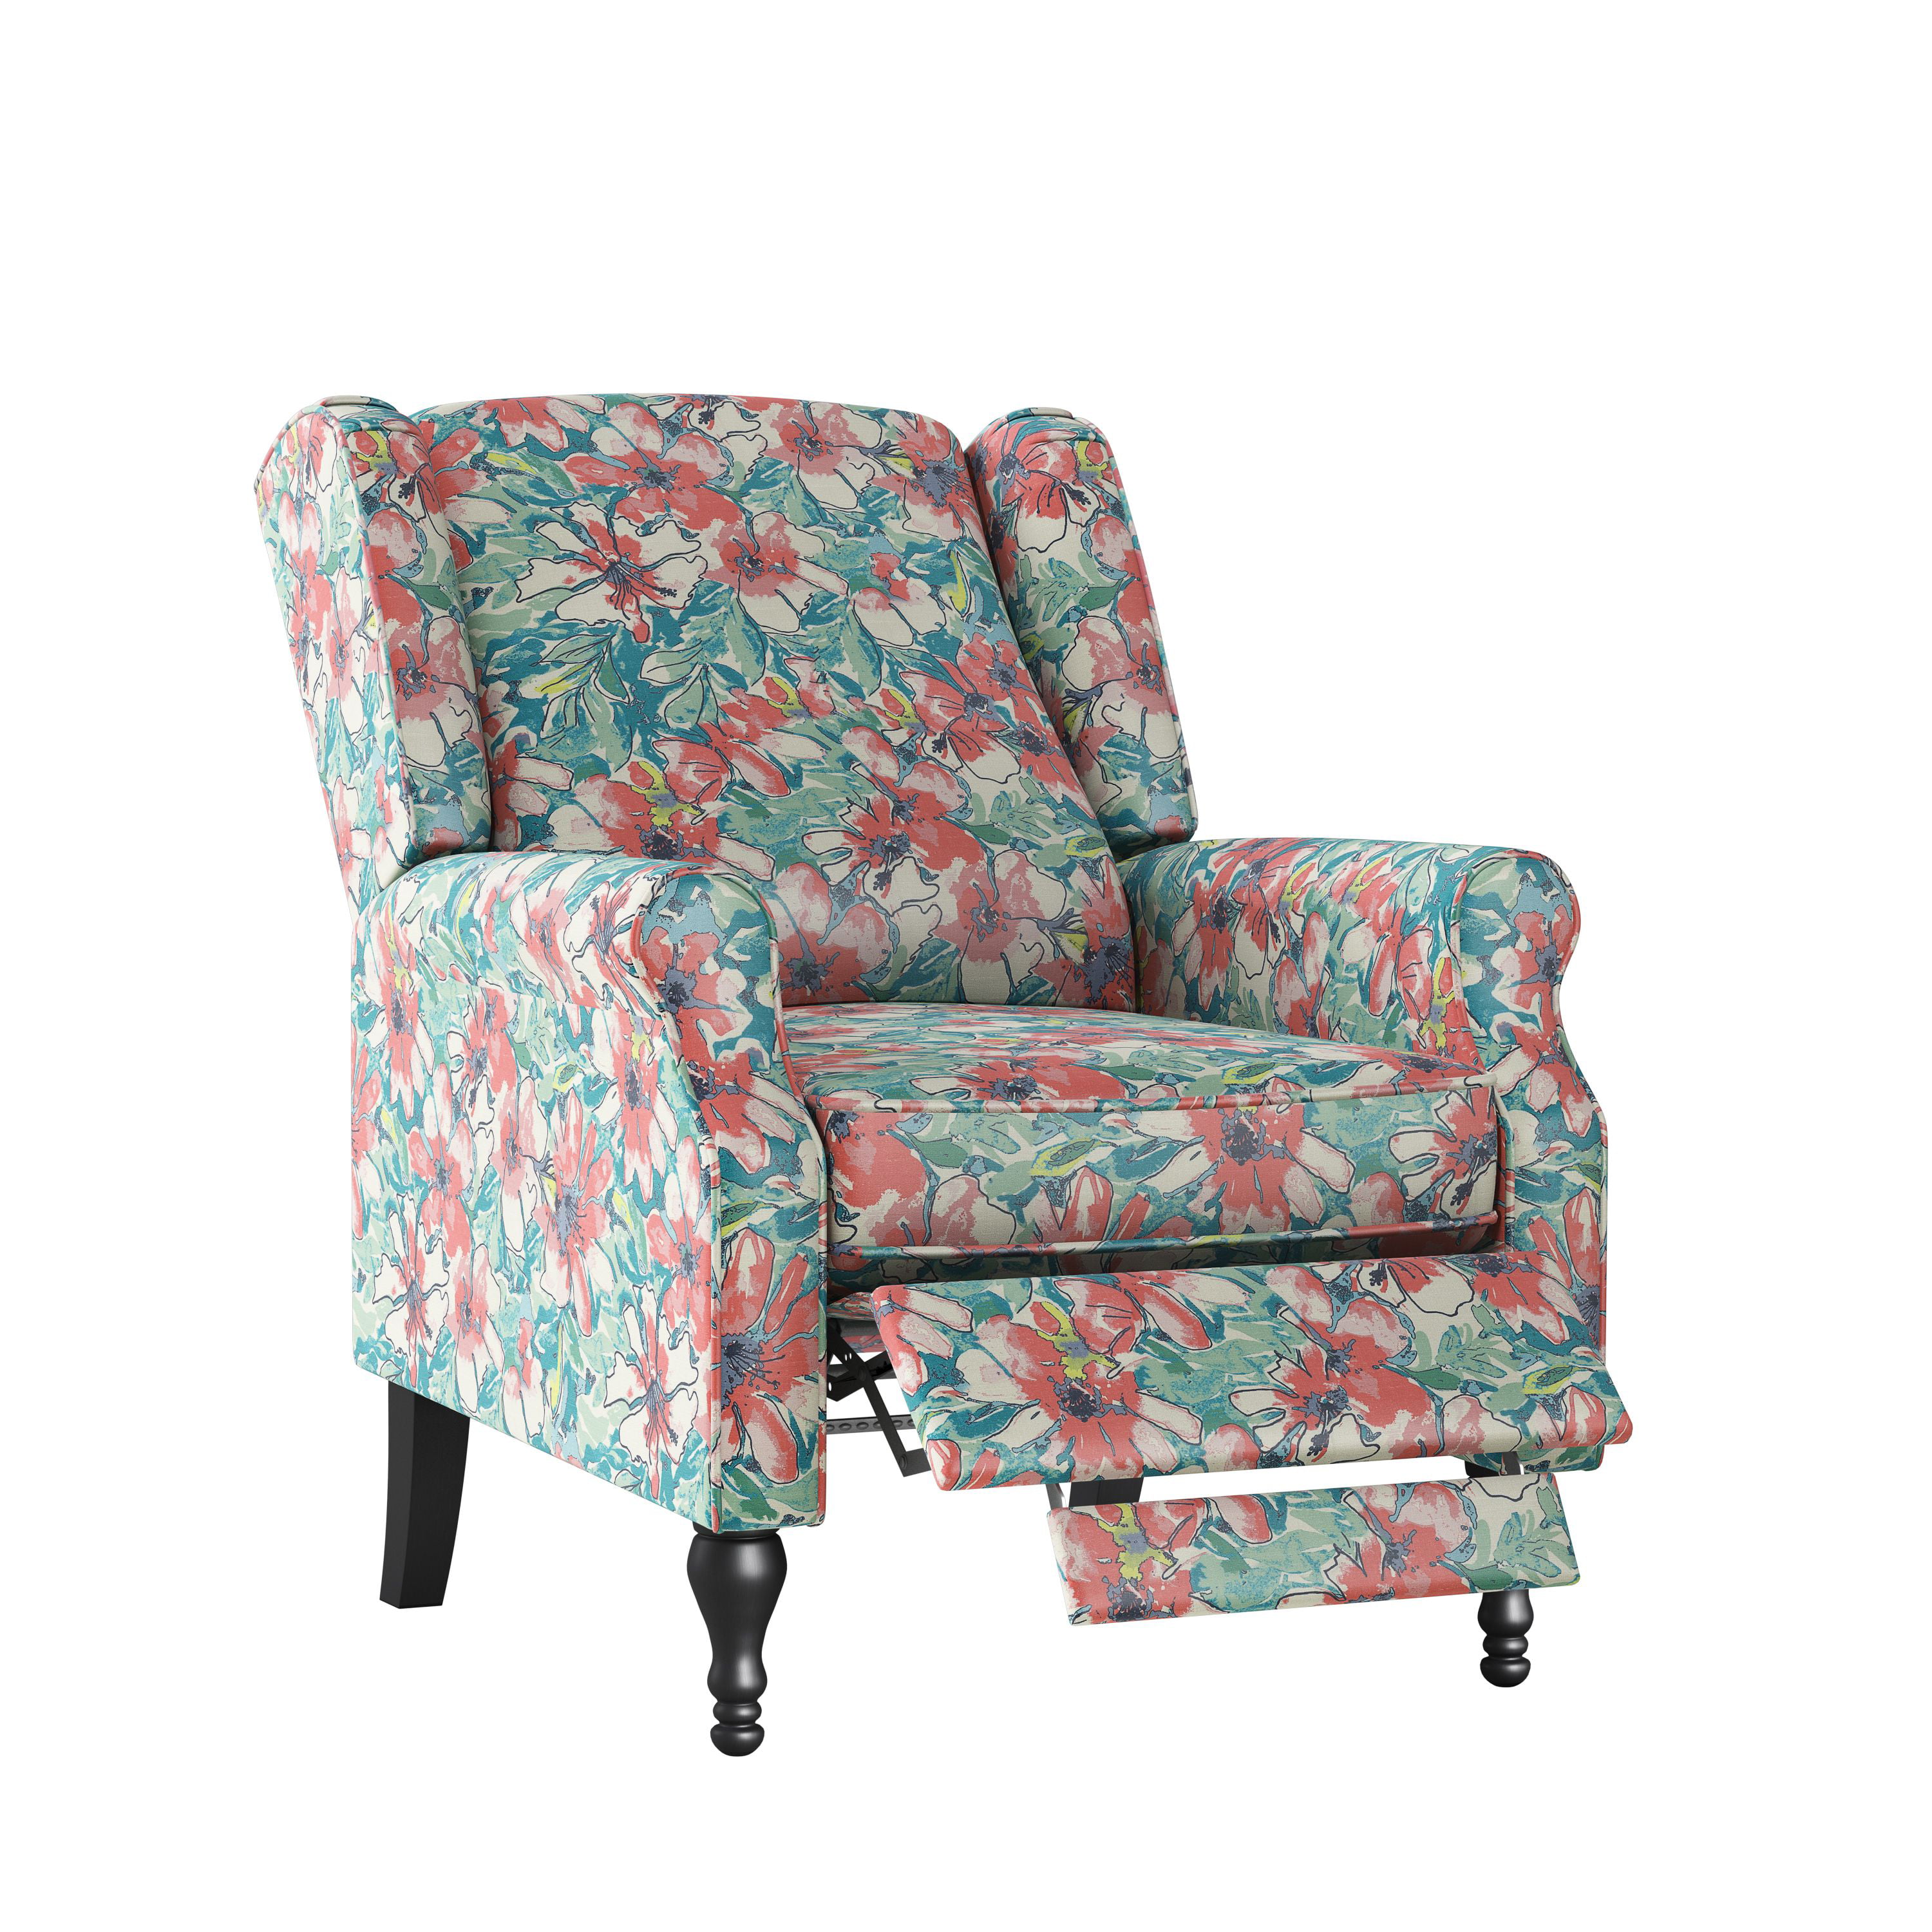 Homesvale Elmina Wingback Push Back Recliner Chair in Floral Bouquet Print